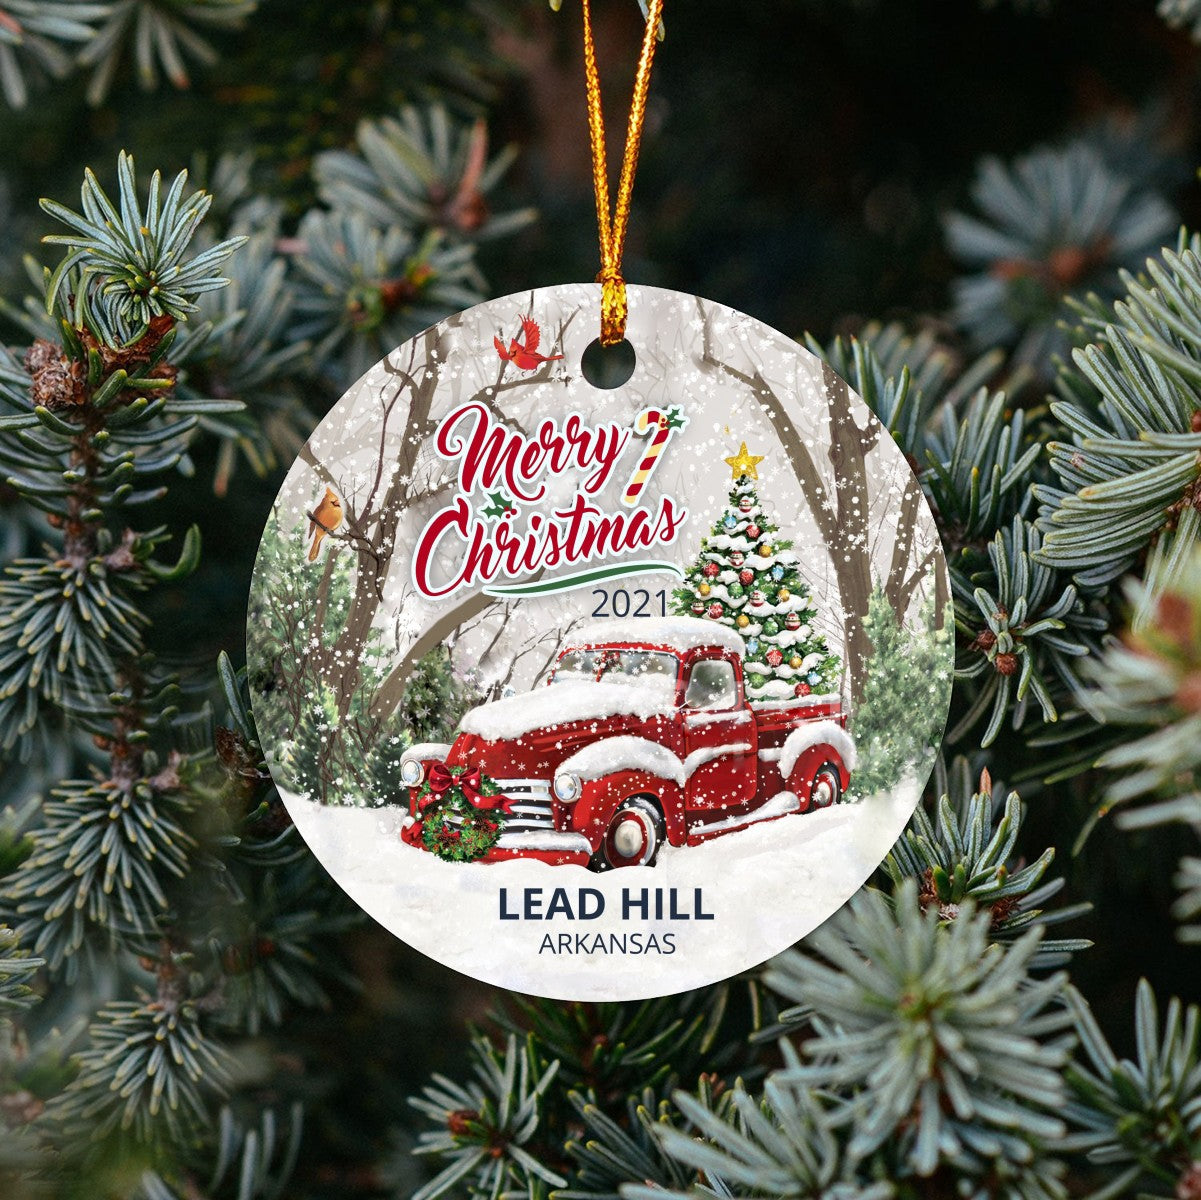 Christmas Tree Ornaments Lead Hill - Ornament With Name City, State Lead Hill Arkansas AR Ornament - Red Truck Xmas Ornaments 3'' Plastic Gift For Family, Friend And Housewarming